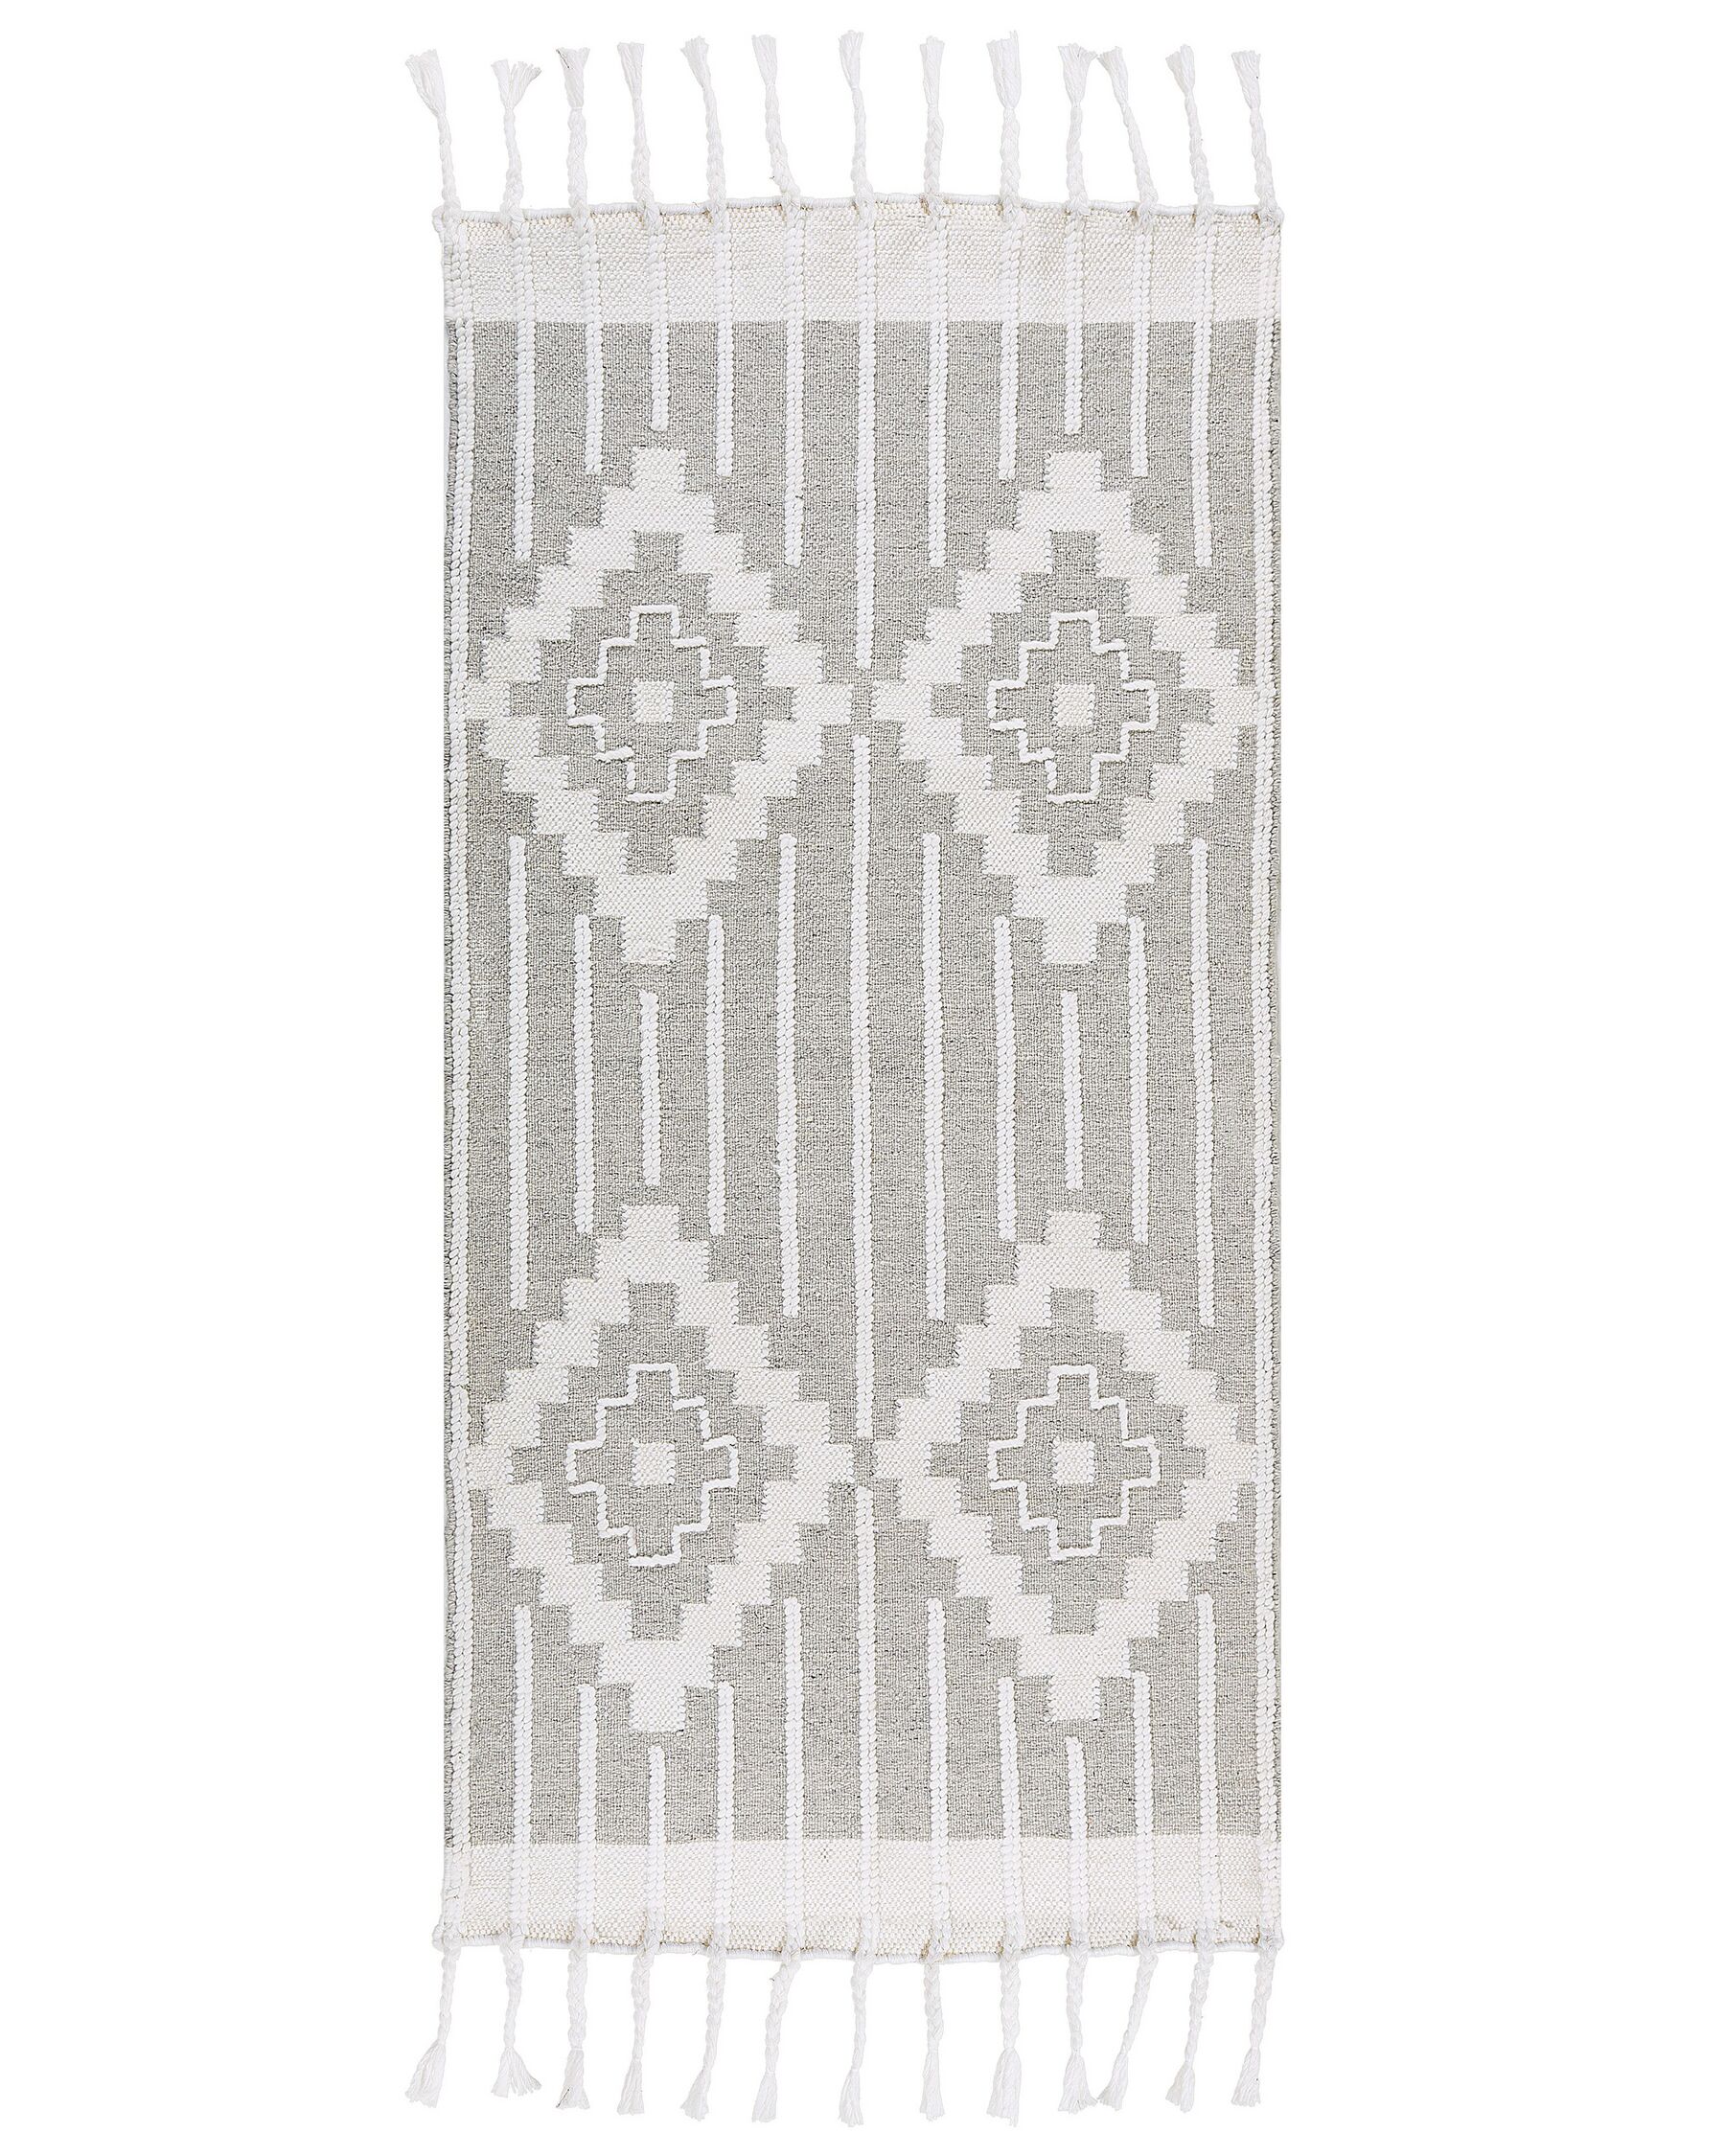 Outdoor Area Rug 80 x 150 cm Grey and White TABIAT_852856